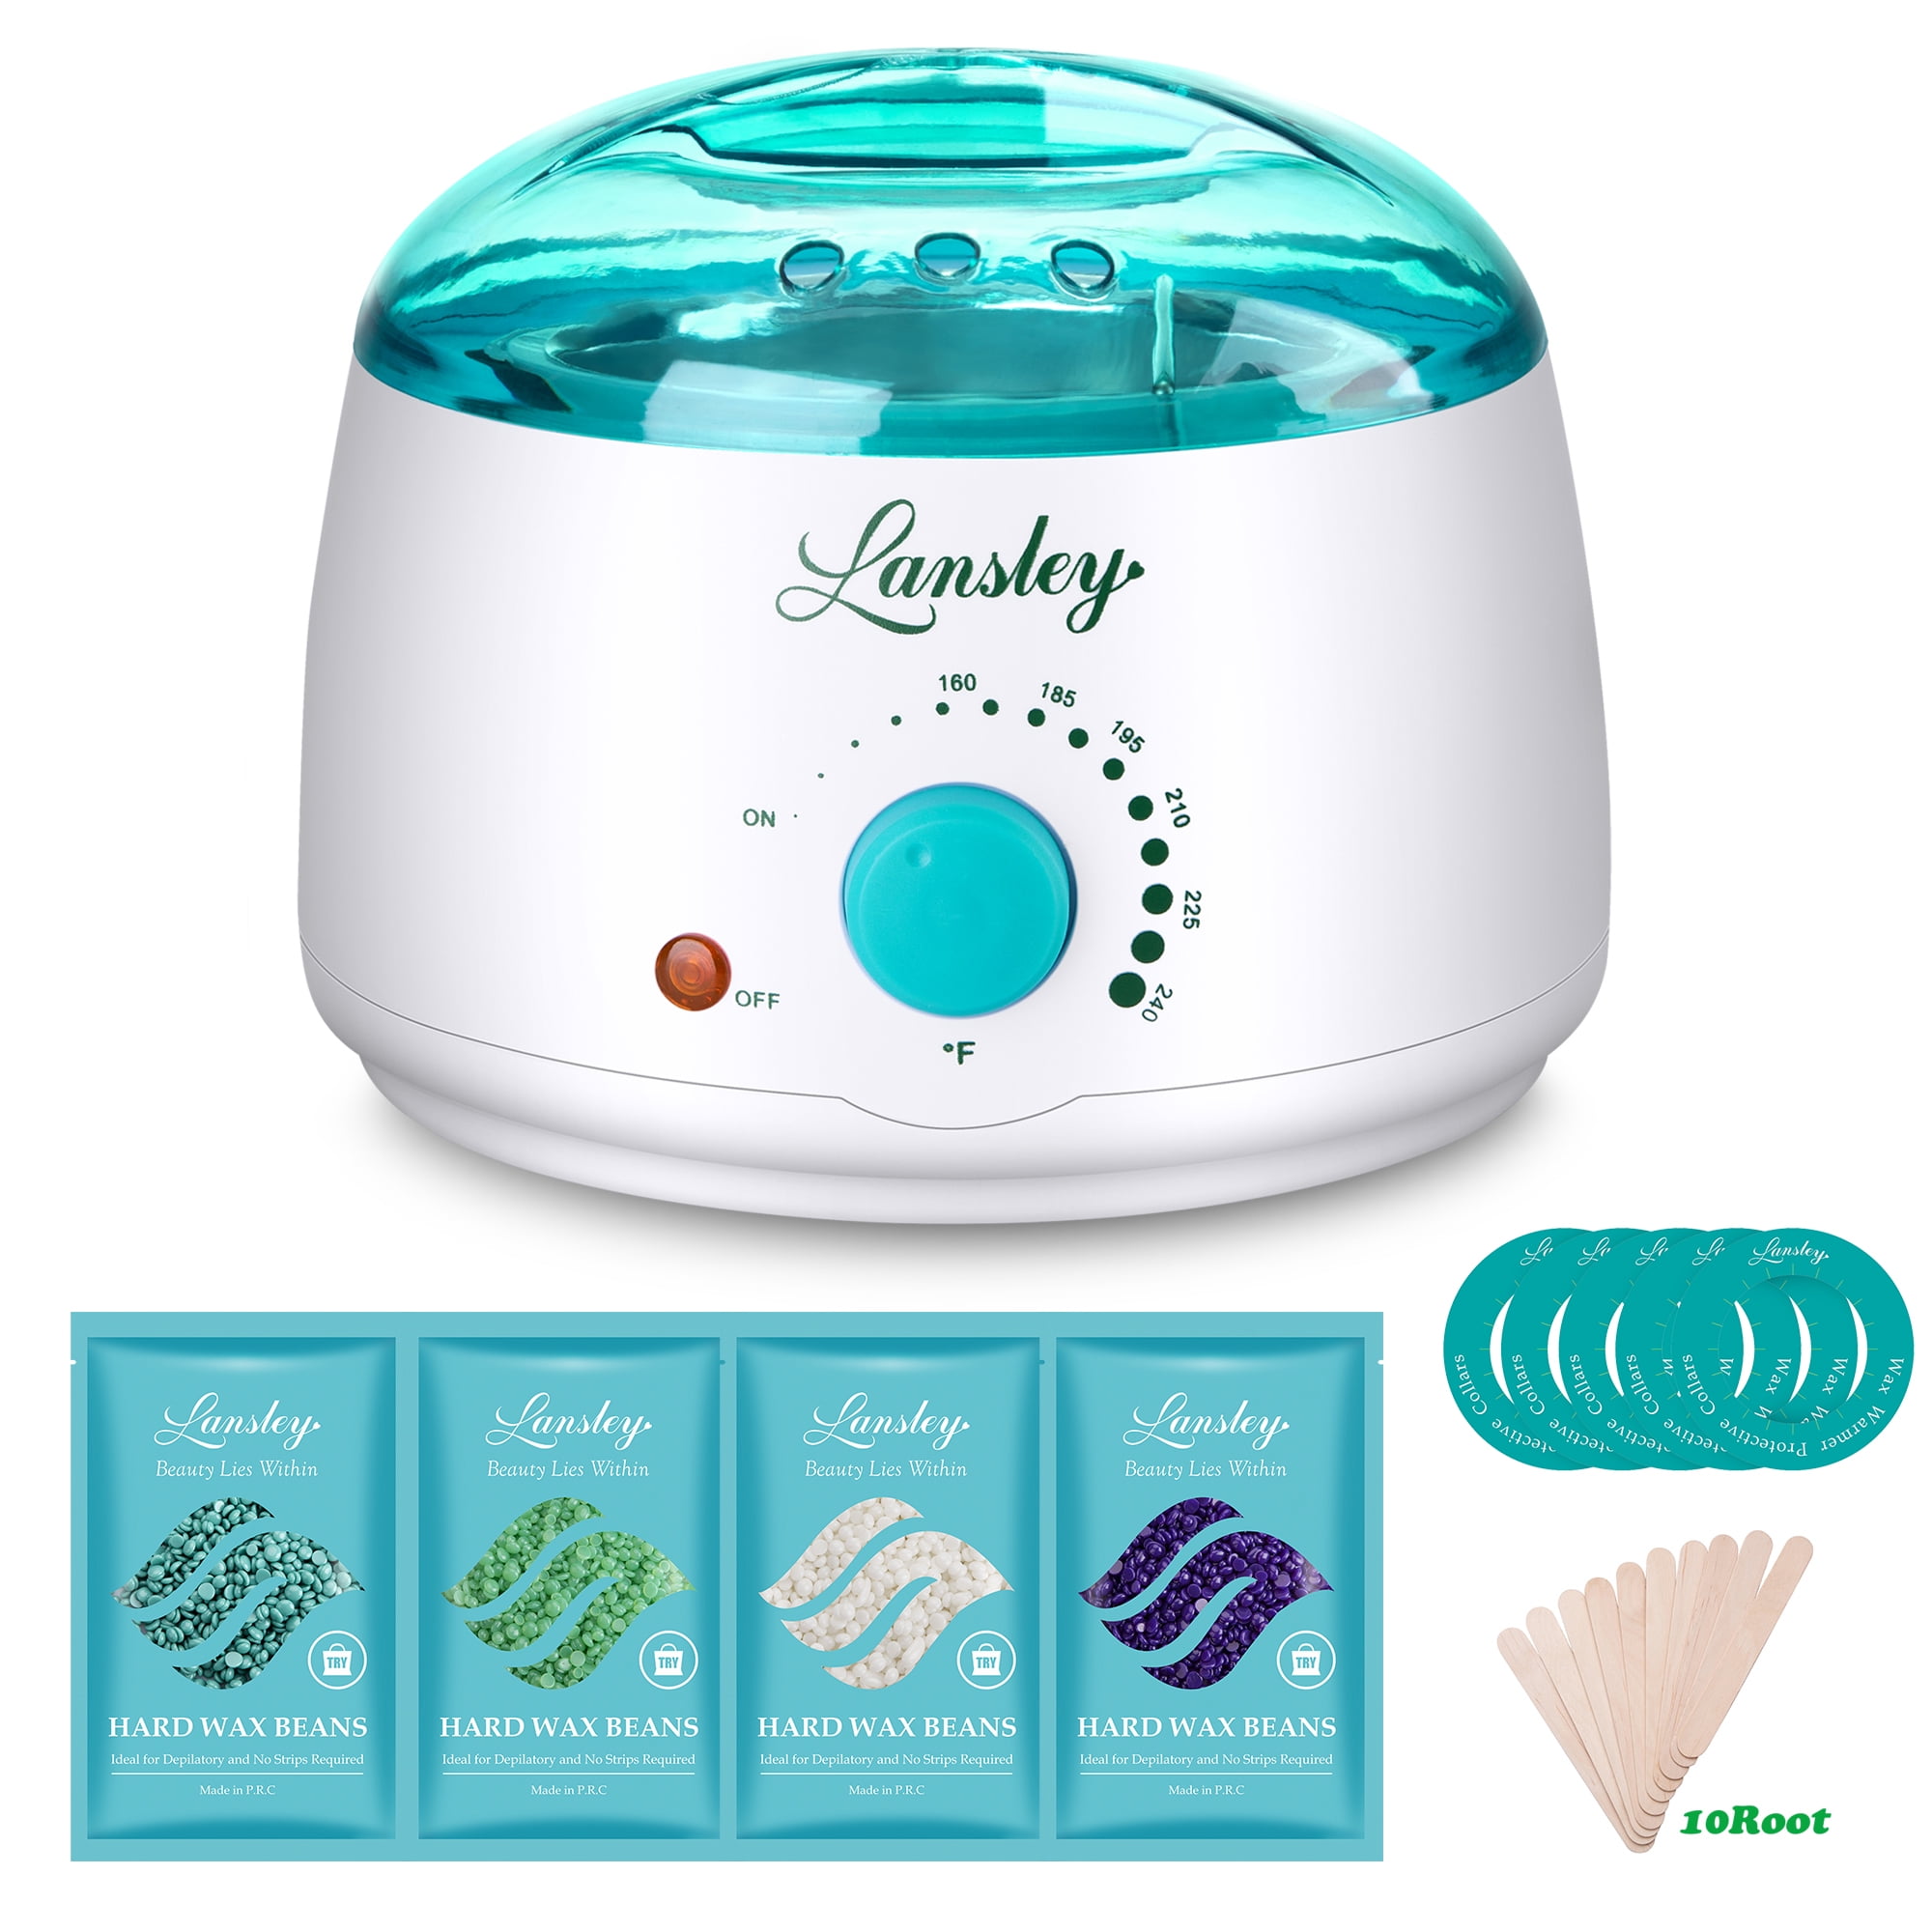 Lifestance Wax Warmer Hair Removal Home Waxing Kit Electric Pot Heater for  Rapid Waxing of All Body, Face, Bikini Area, Legs with 4 Flavor Hard Wax  Beans & 10 Wax Applicator Spatulas(At-home